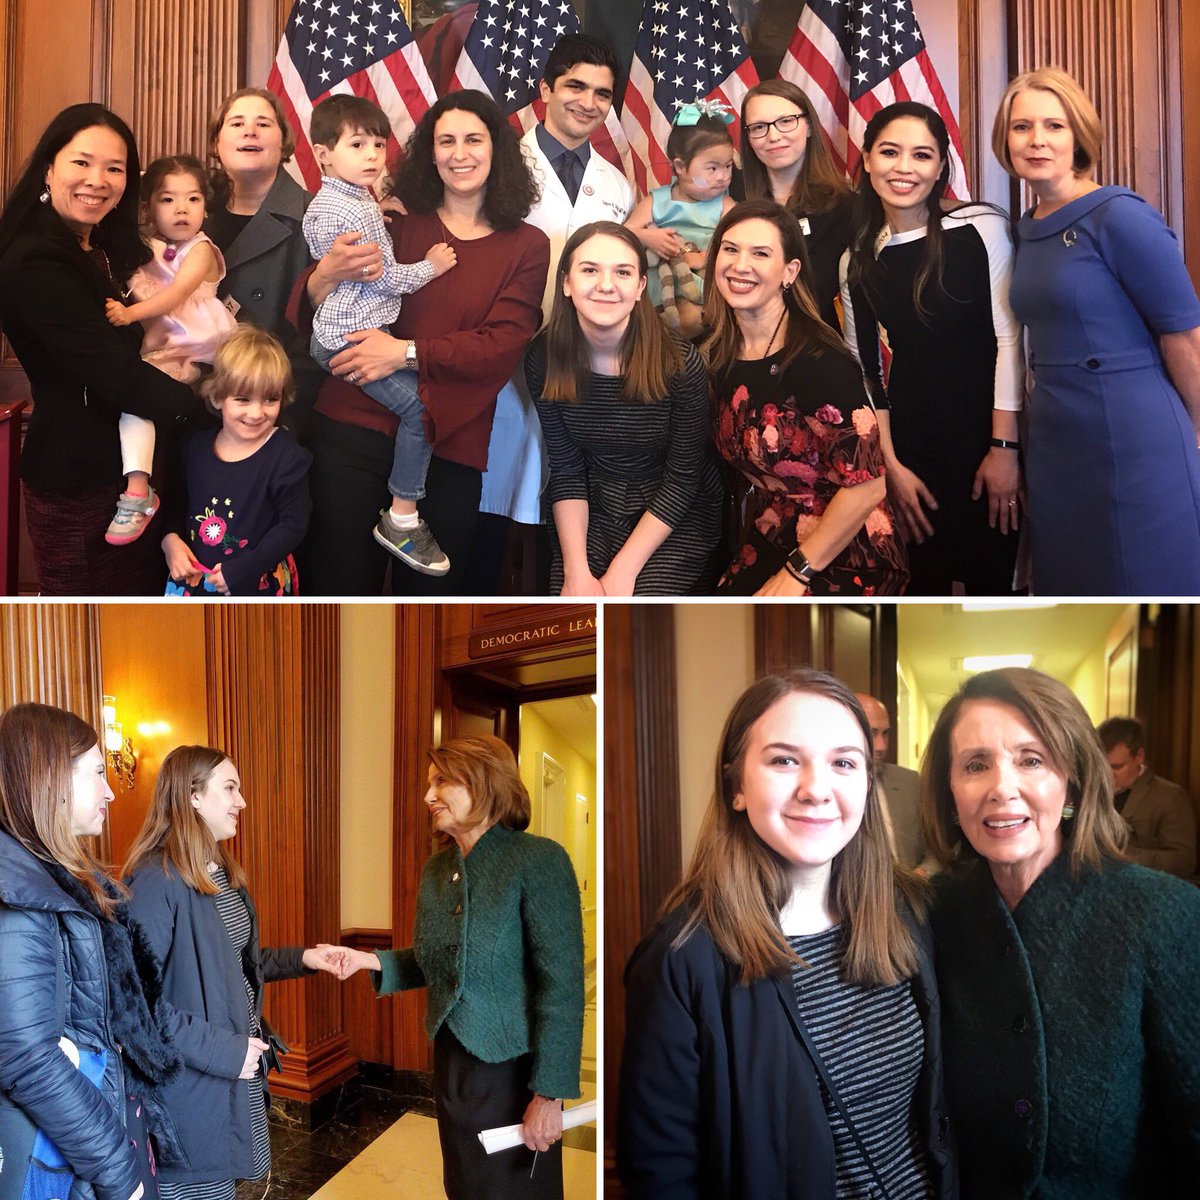 Took my daughter to work today w/ @LittleLobbyists & @HealthCareVoter to celebrate the  #ACA w/ @NancyPelosi & advocate to #ProtectOurCare. I'm so grateful for the opportunity to show her she has a voice, her voice matters, and ADVOCACY WORKS. #bestrongwomen #raisestrongwomen